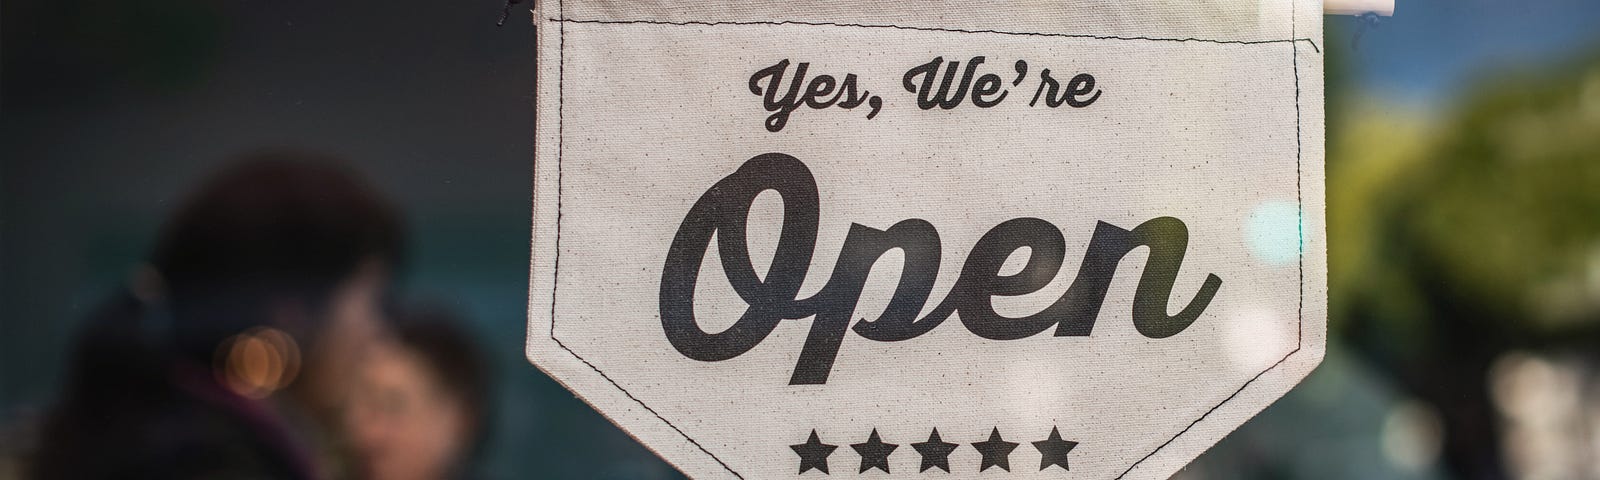 Image of a small banner on a glass door reading “Yes, We’re Open”